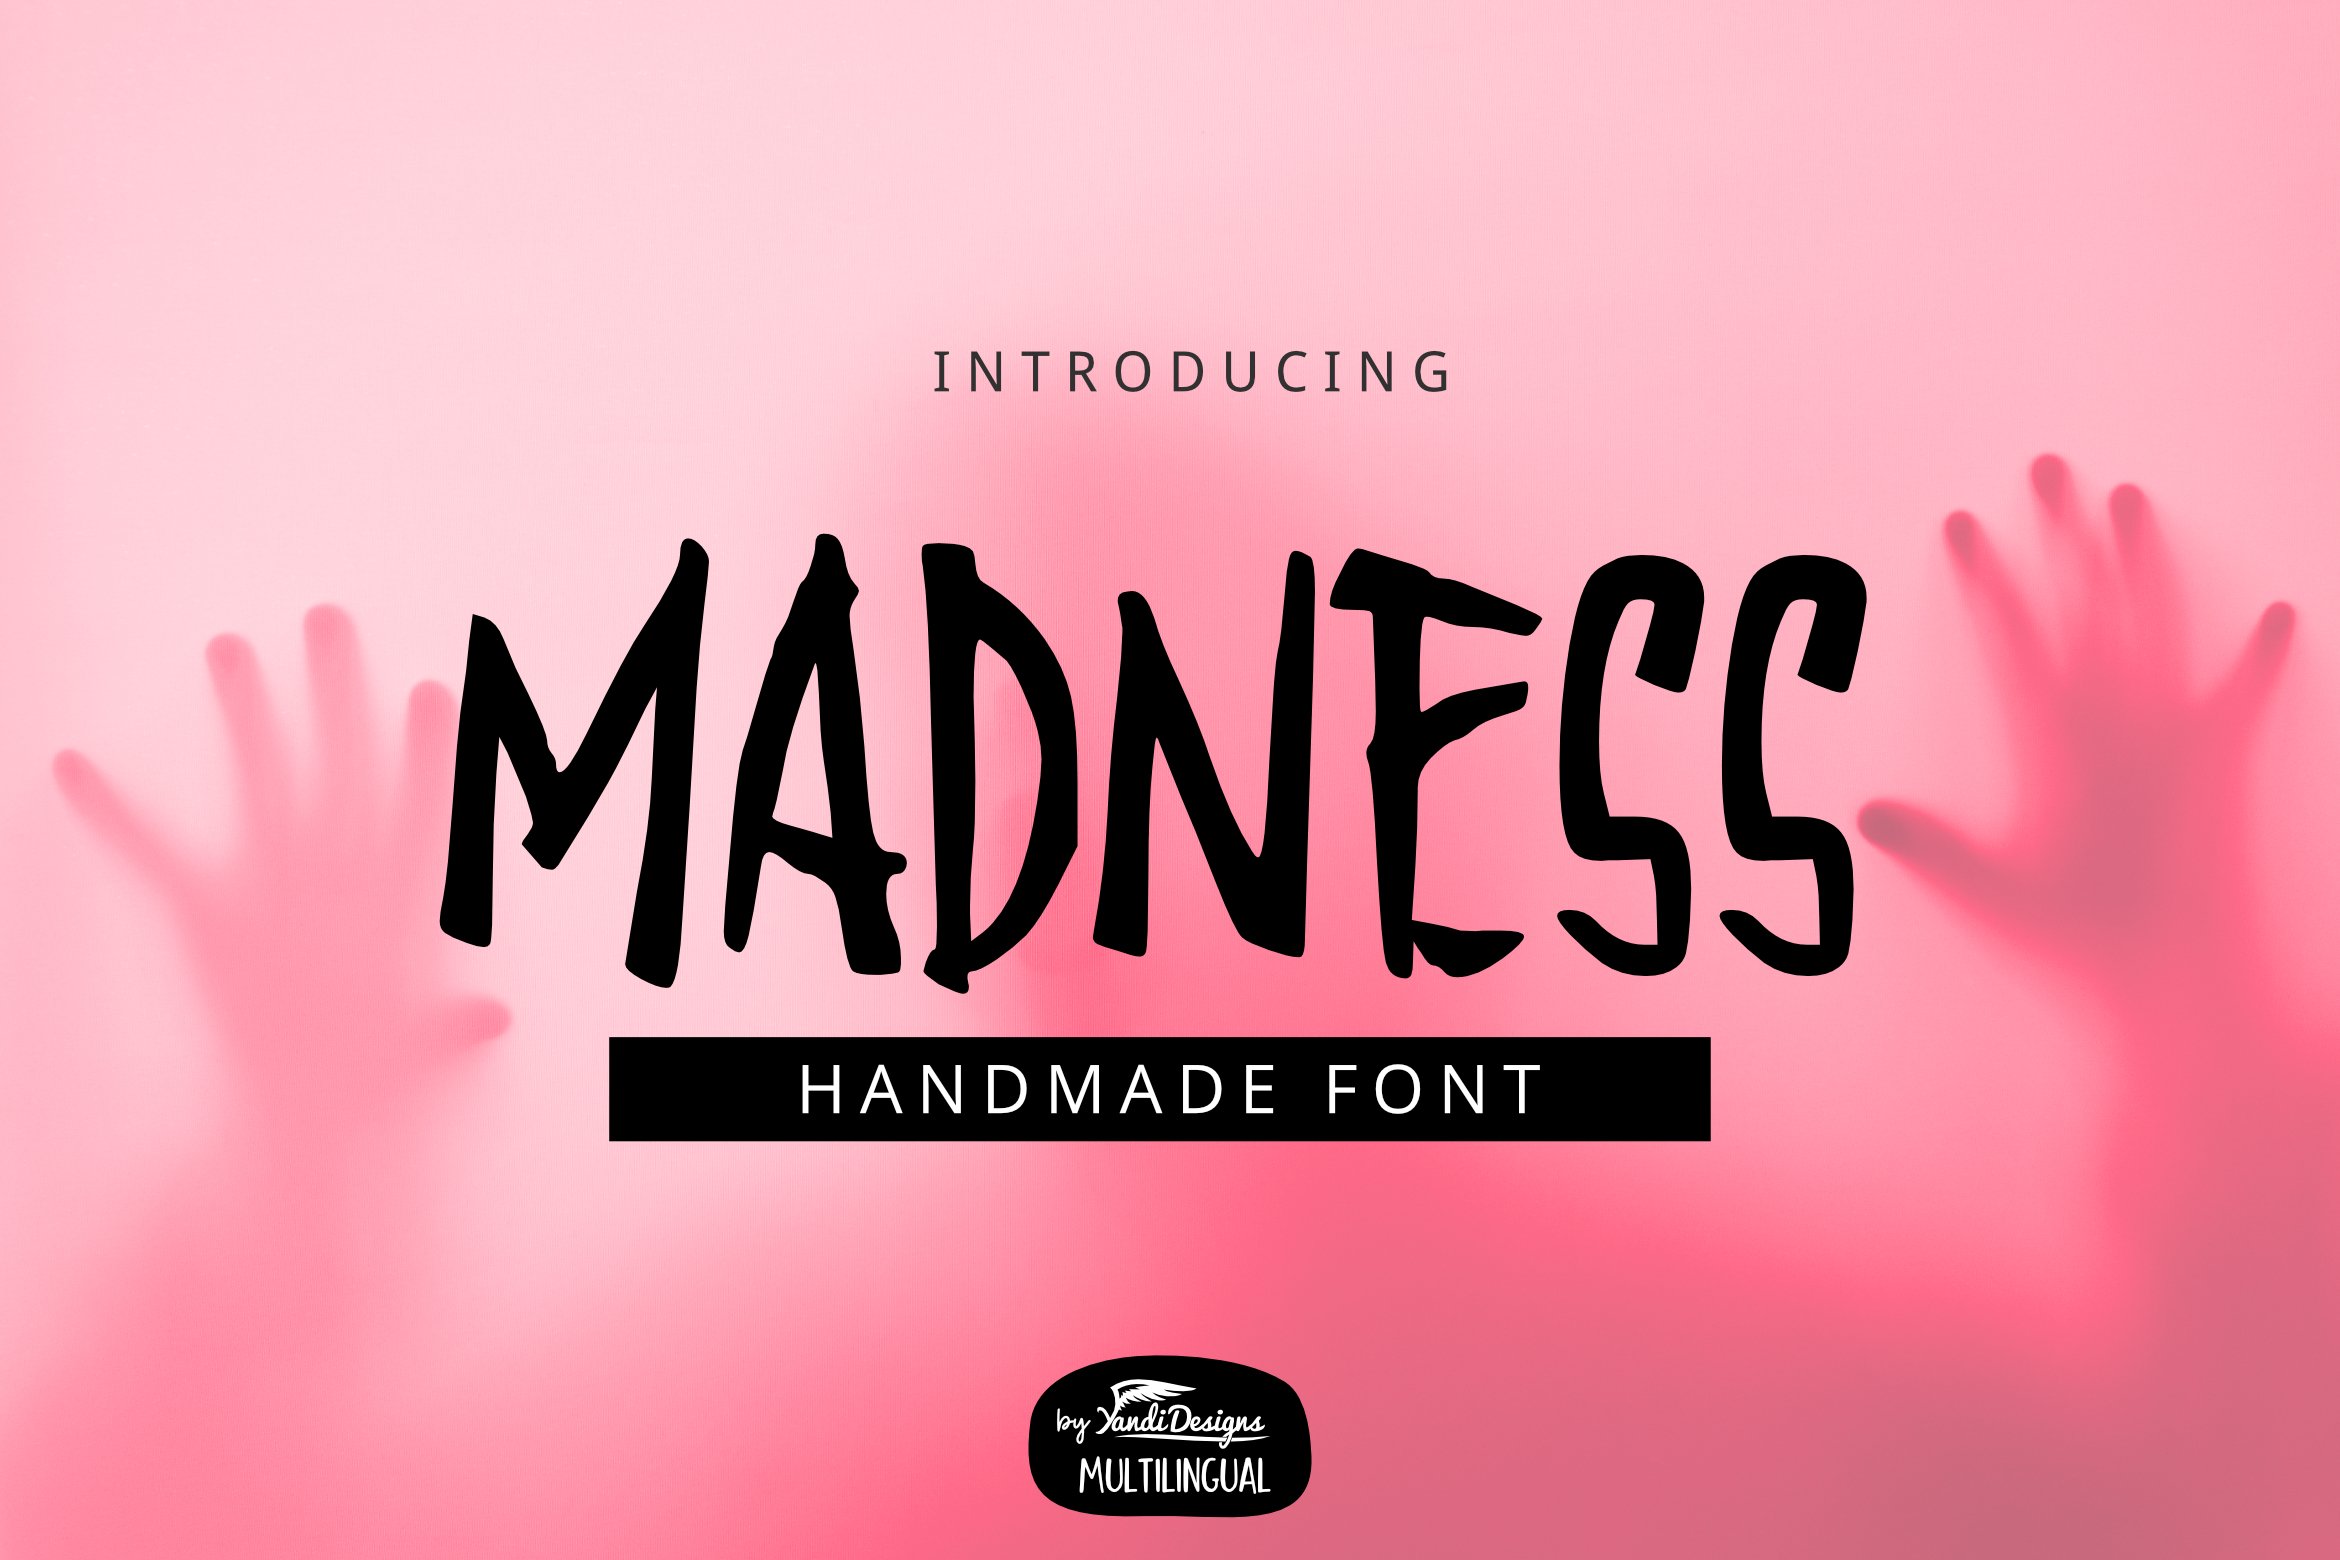 Madness Brush Font cover image.